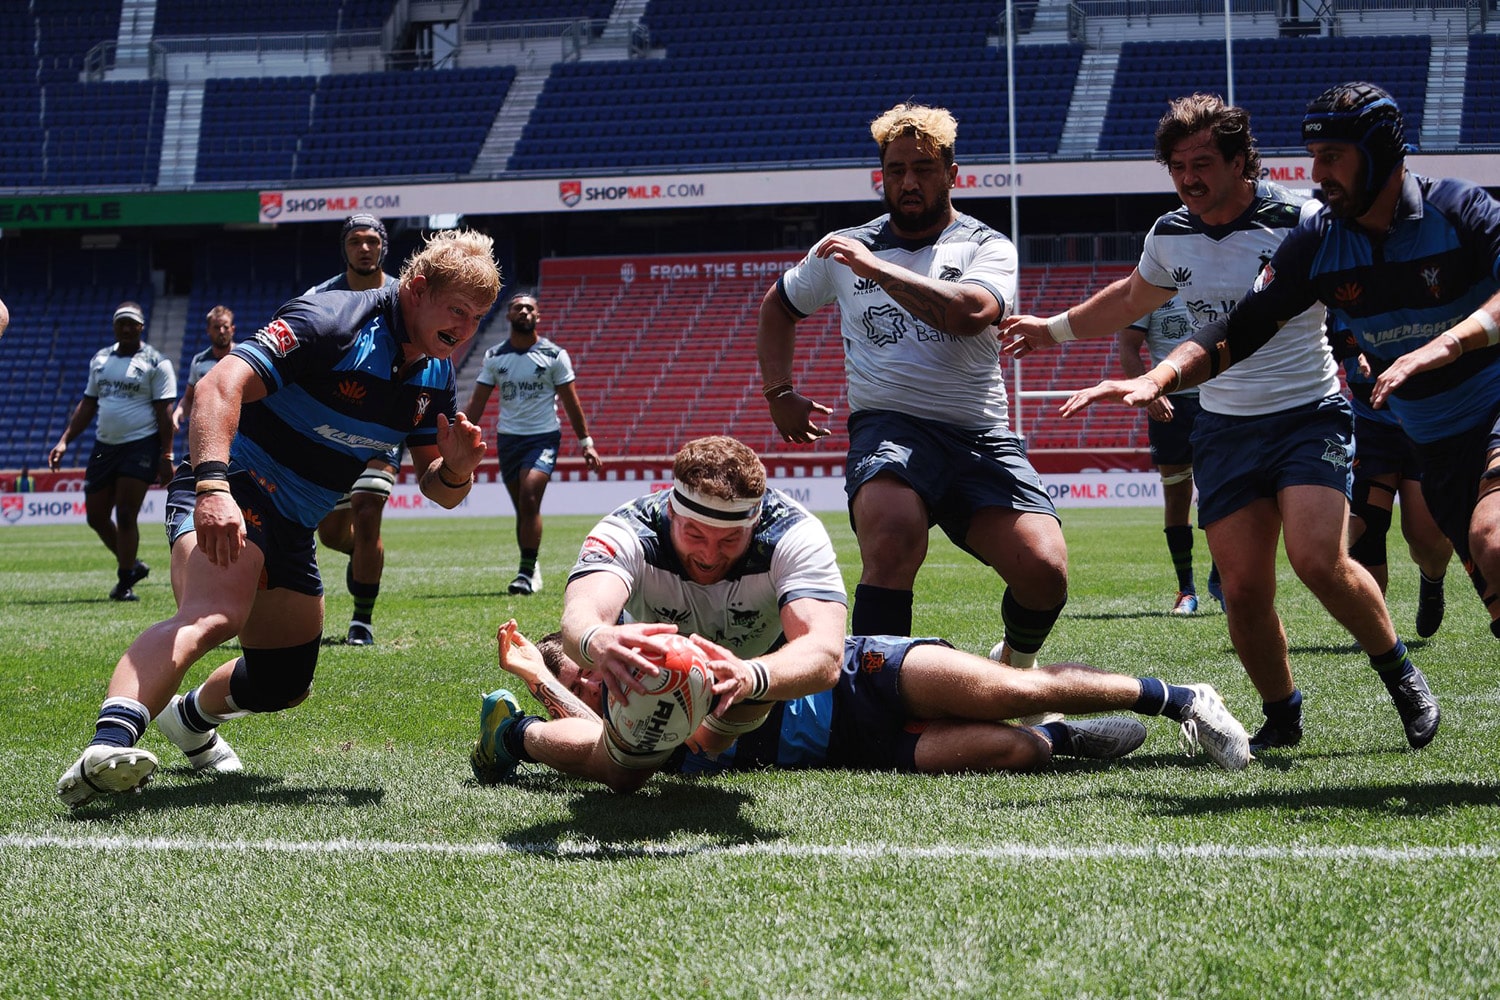 Quincy-based Free Jacks Win Major League Rugby Championship